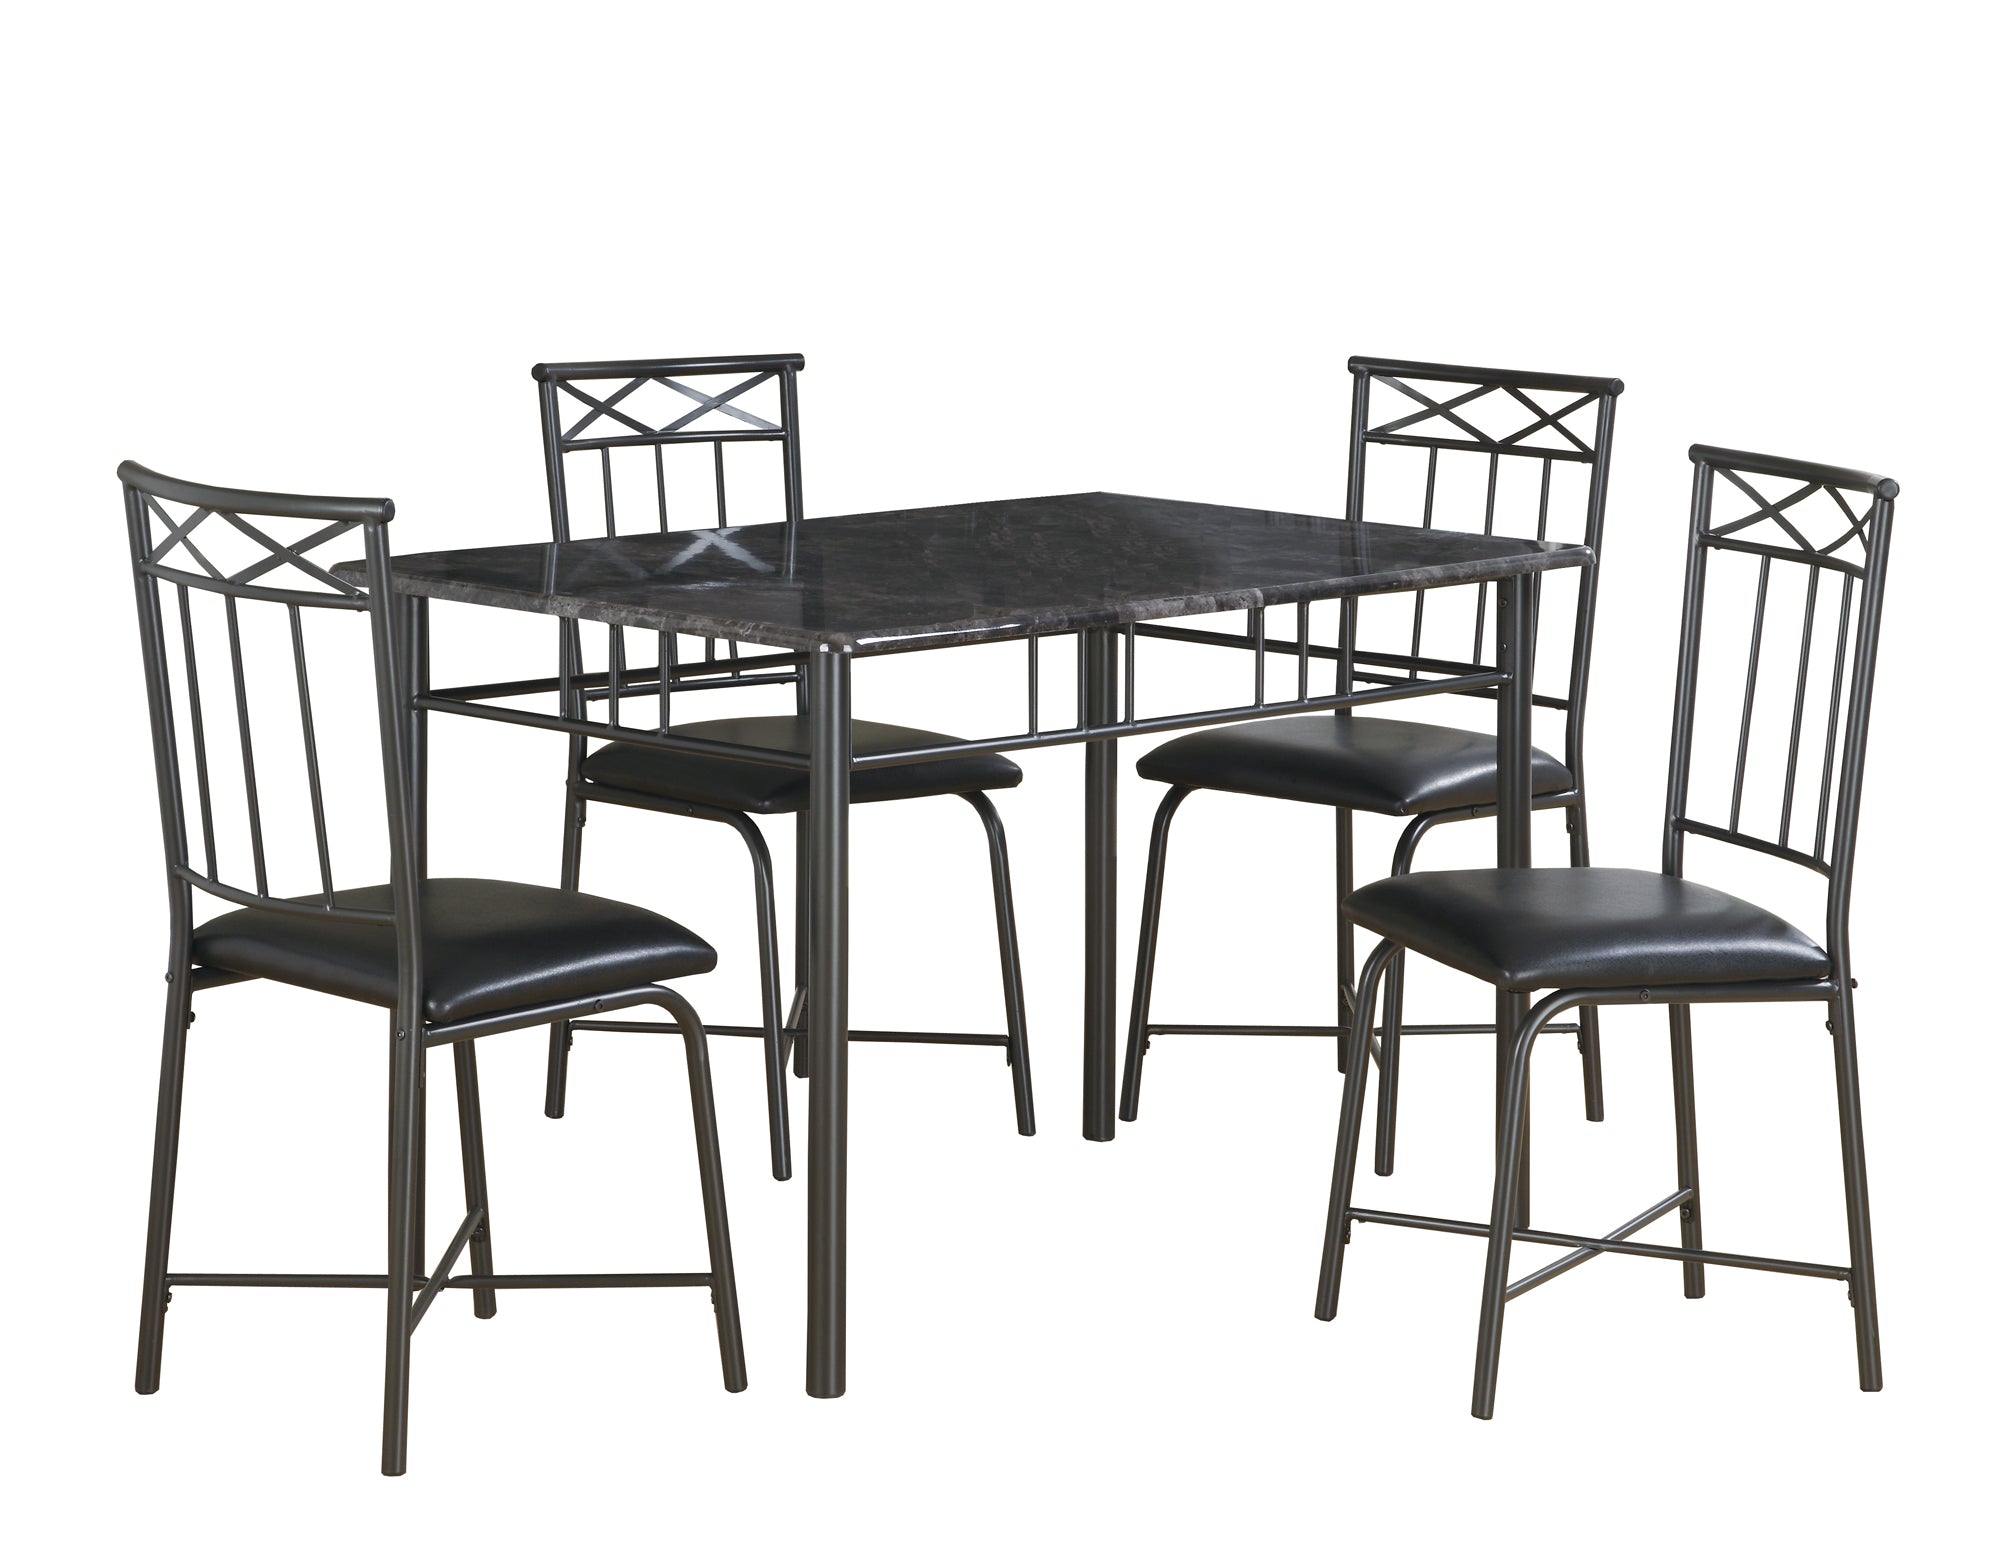 Gabey Stylish And Heavy-duty Dining 5 Pcs Set With Metal legs